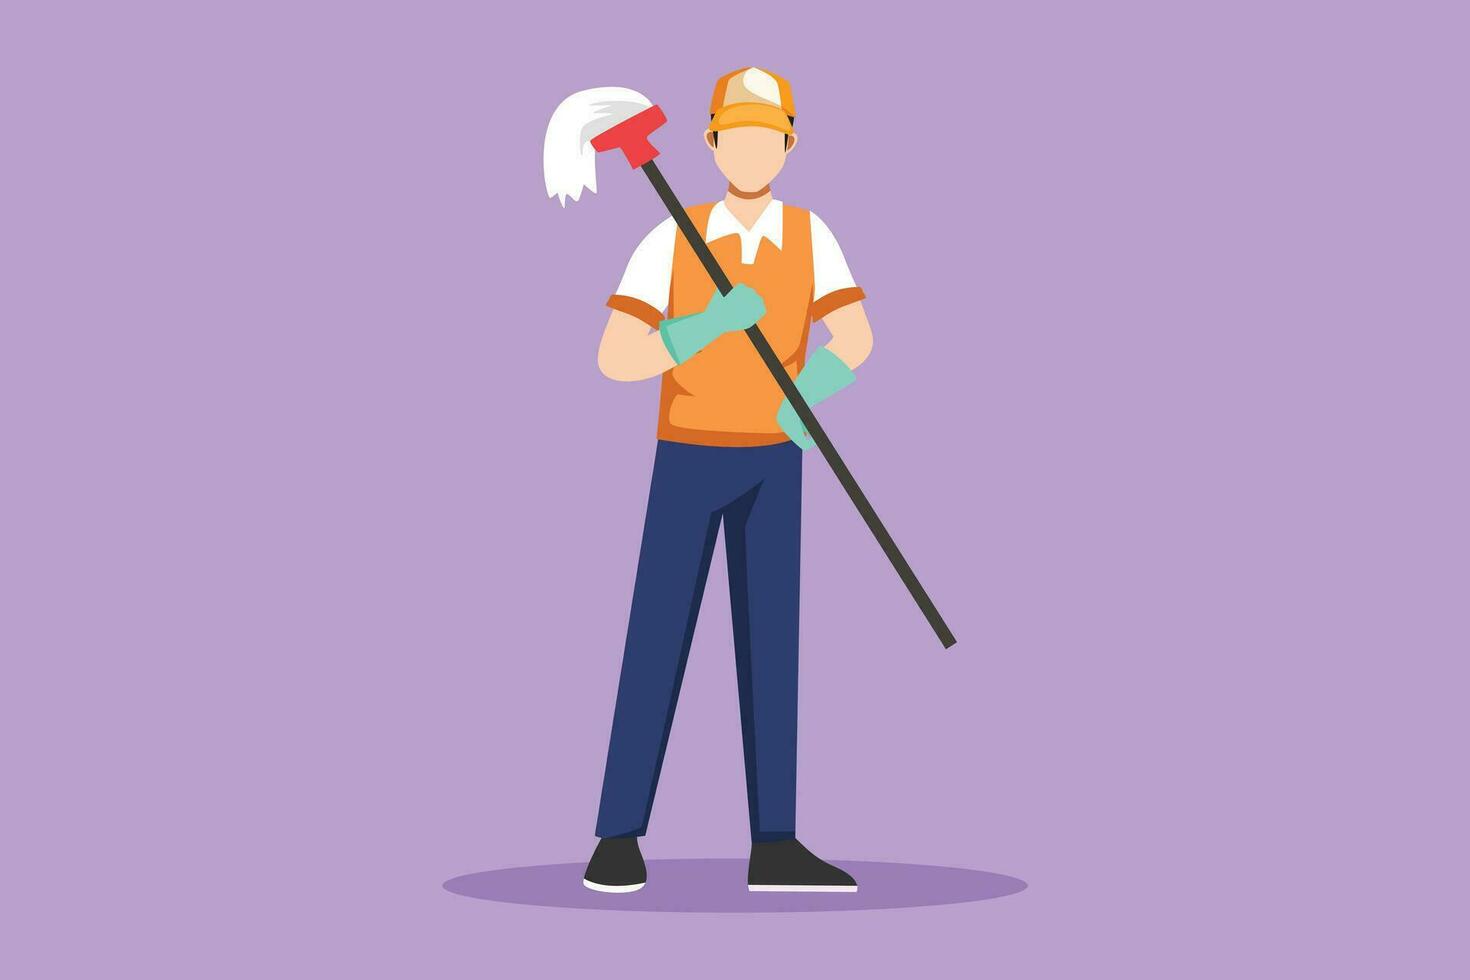 Graphic flat design drawing happy male cleaning staff member holding mop in gloves on blue background. Concept of different people like working in cleaning service. Cartoon style vector illustration